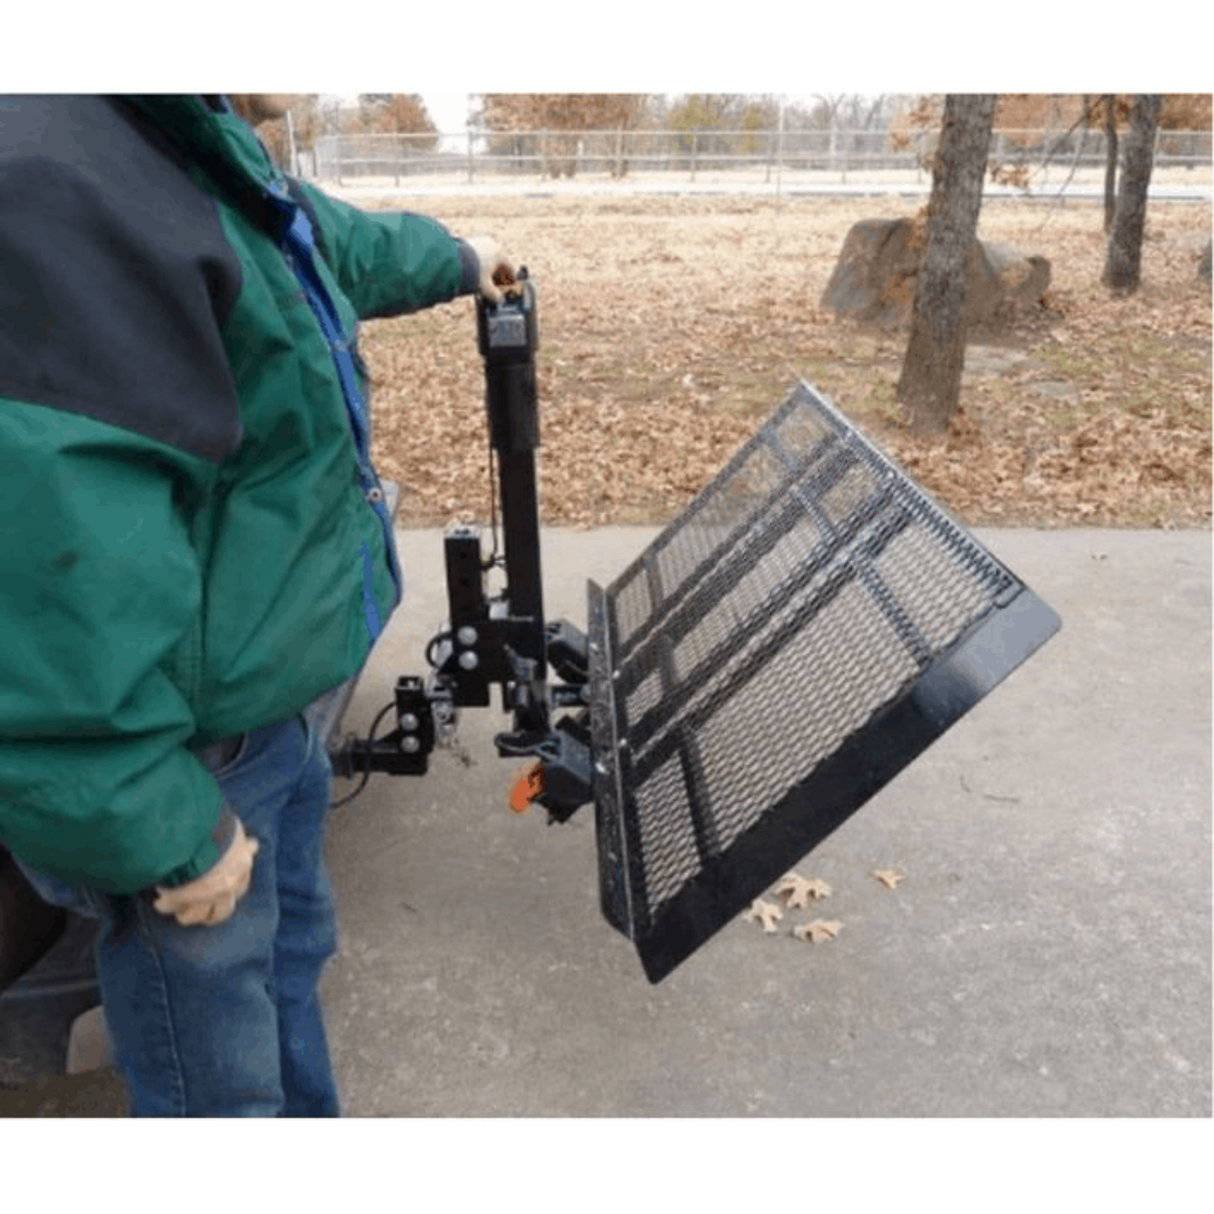 EZ-Carrier Electric Vehicle Lift for Wheelchairs & Scooters - EZCL